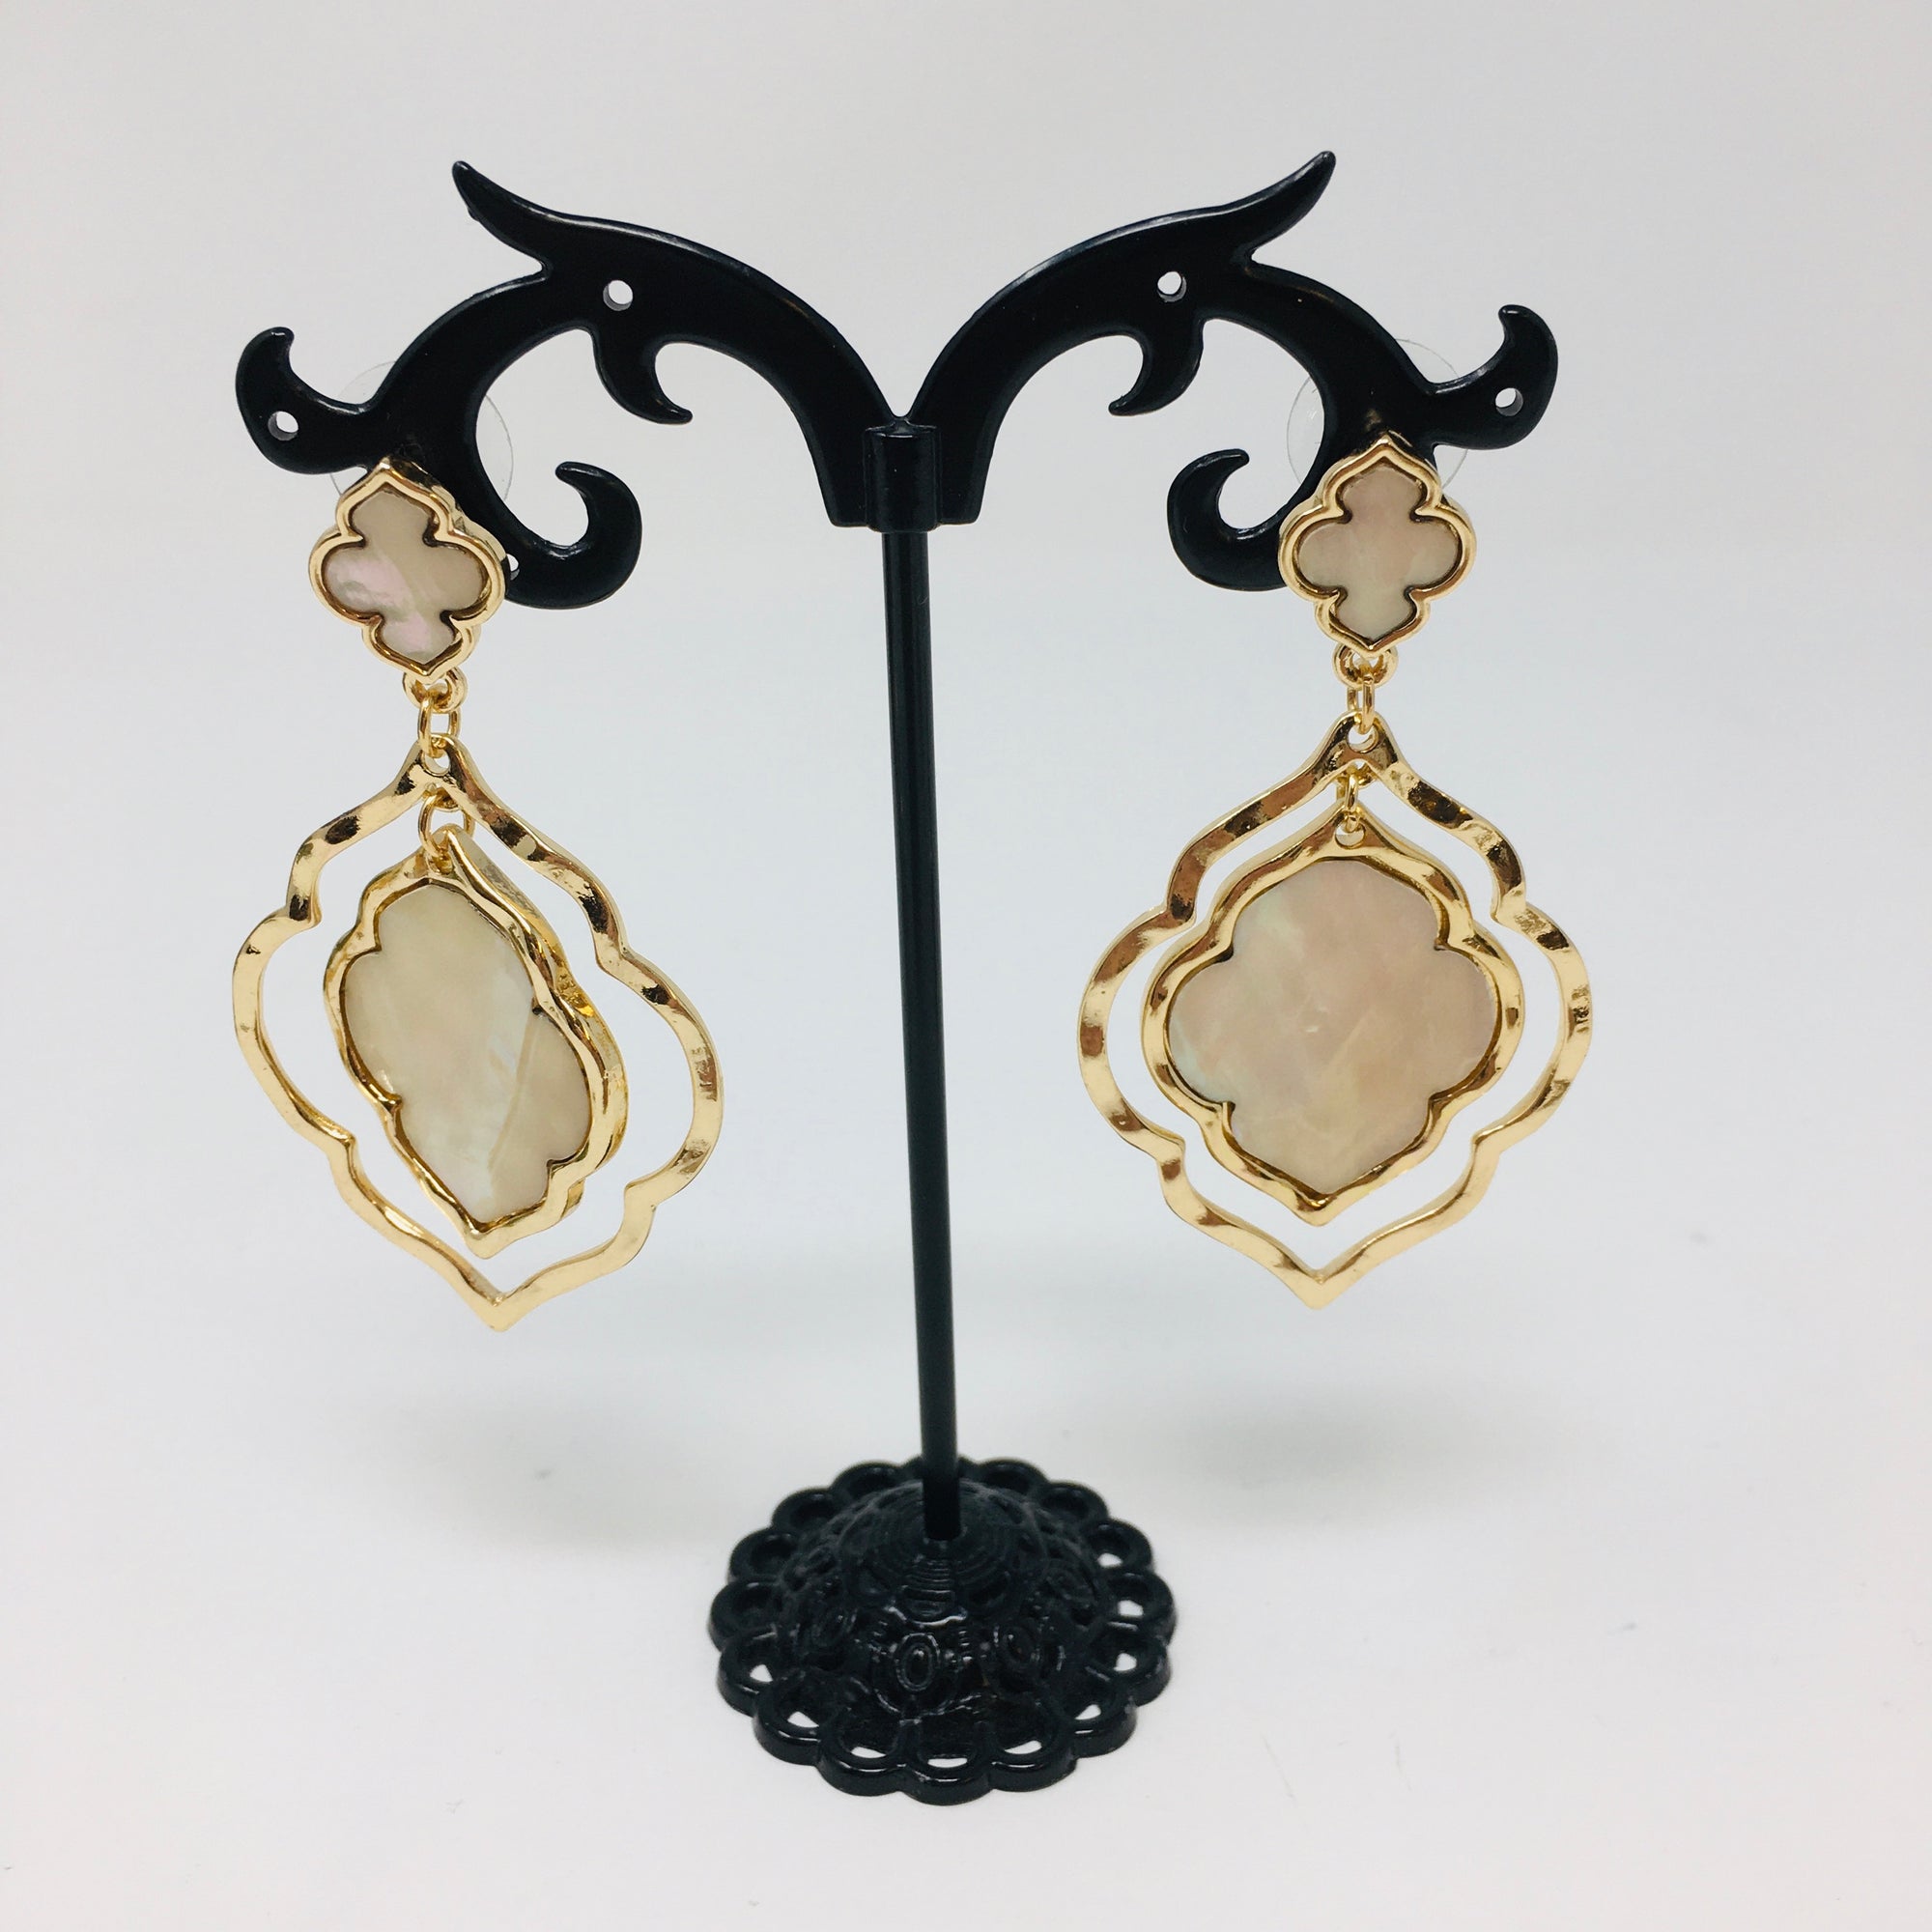 double layer arabesque shaped gold tone earrings with mother of pearl inserts shown on a white background